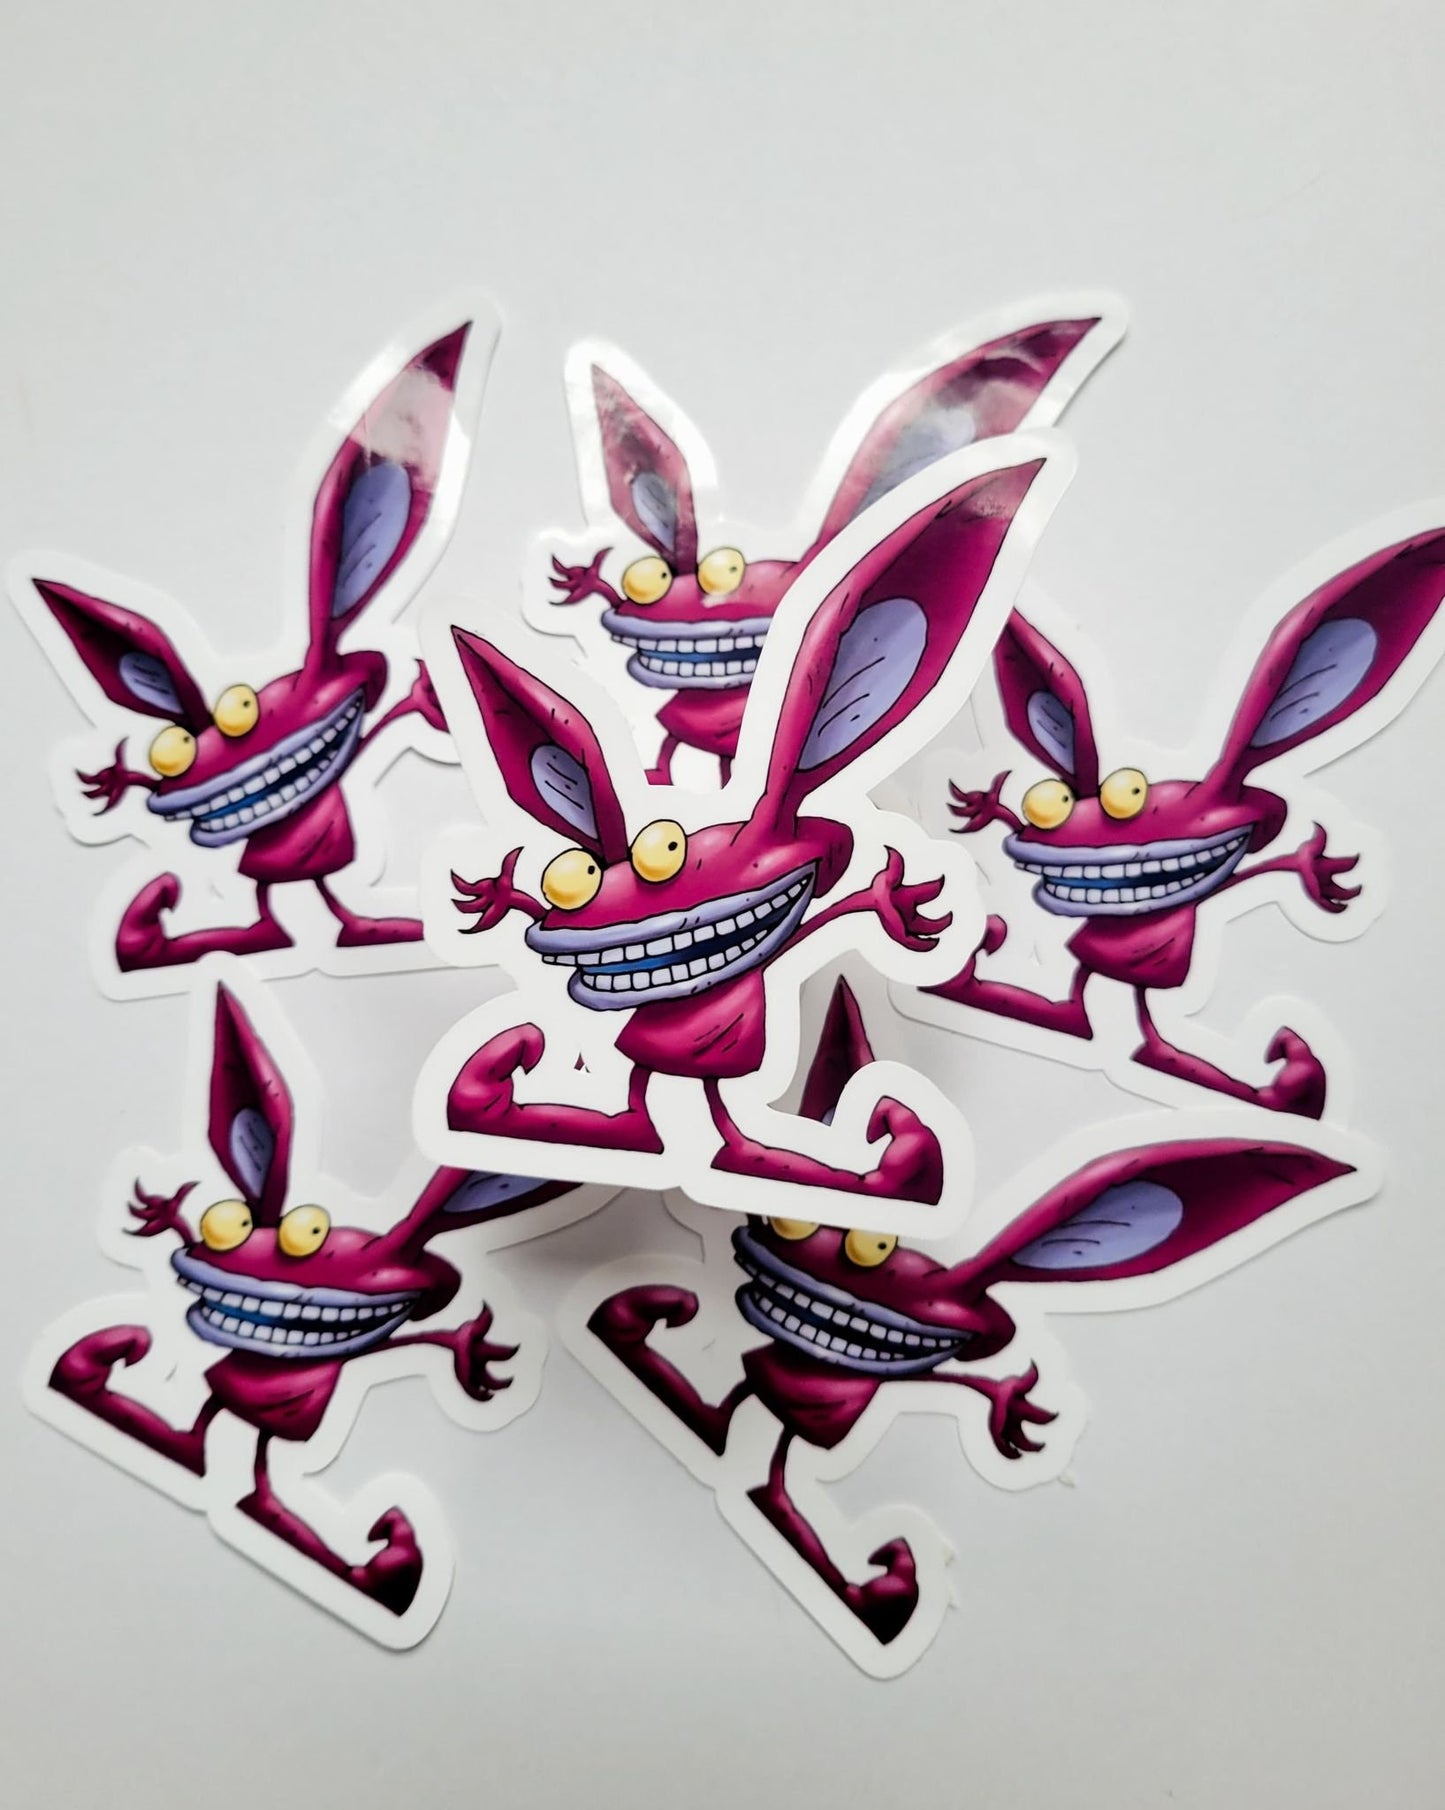 Ickis ahh real monsters 90's Nostalgia sticker